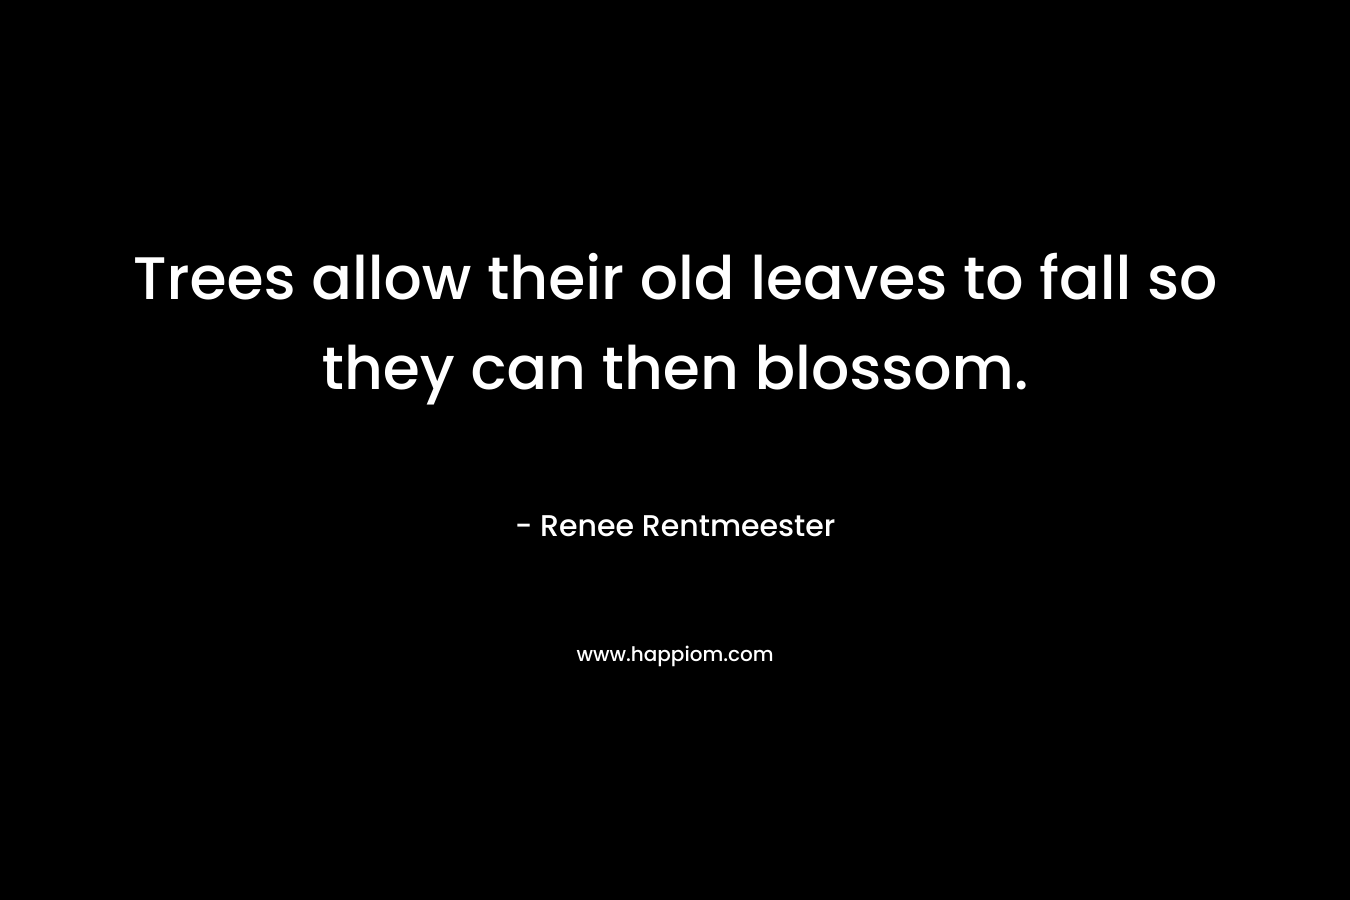 Trees allow their old leaves to fall so they can then blossom.